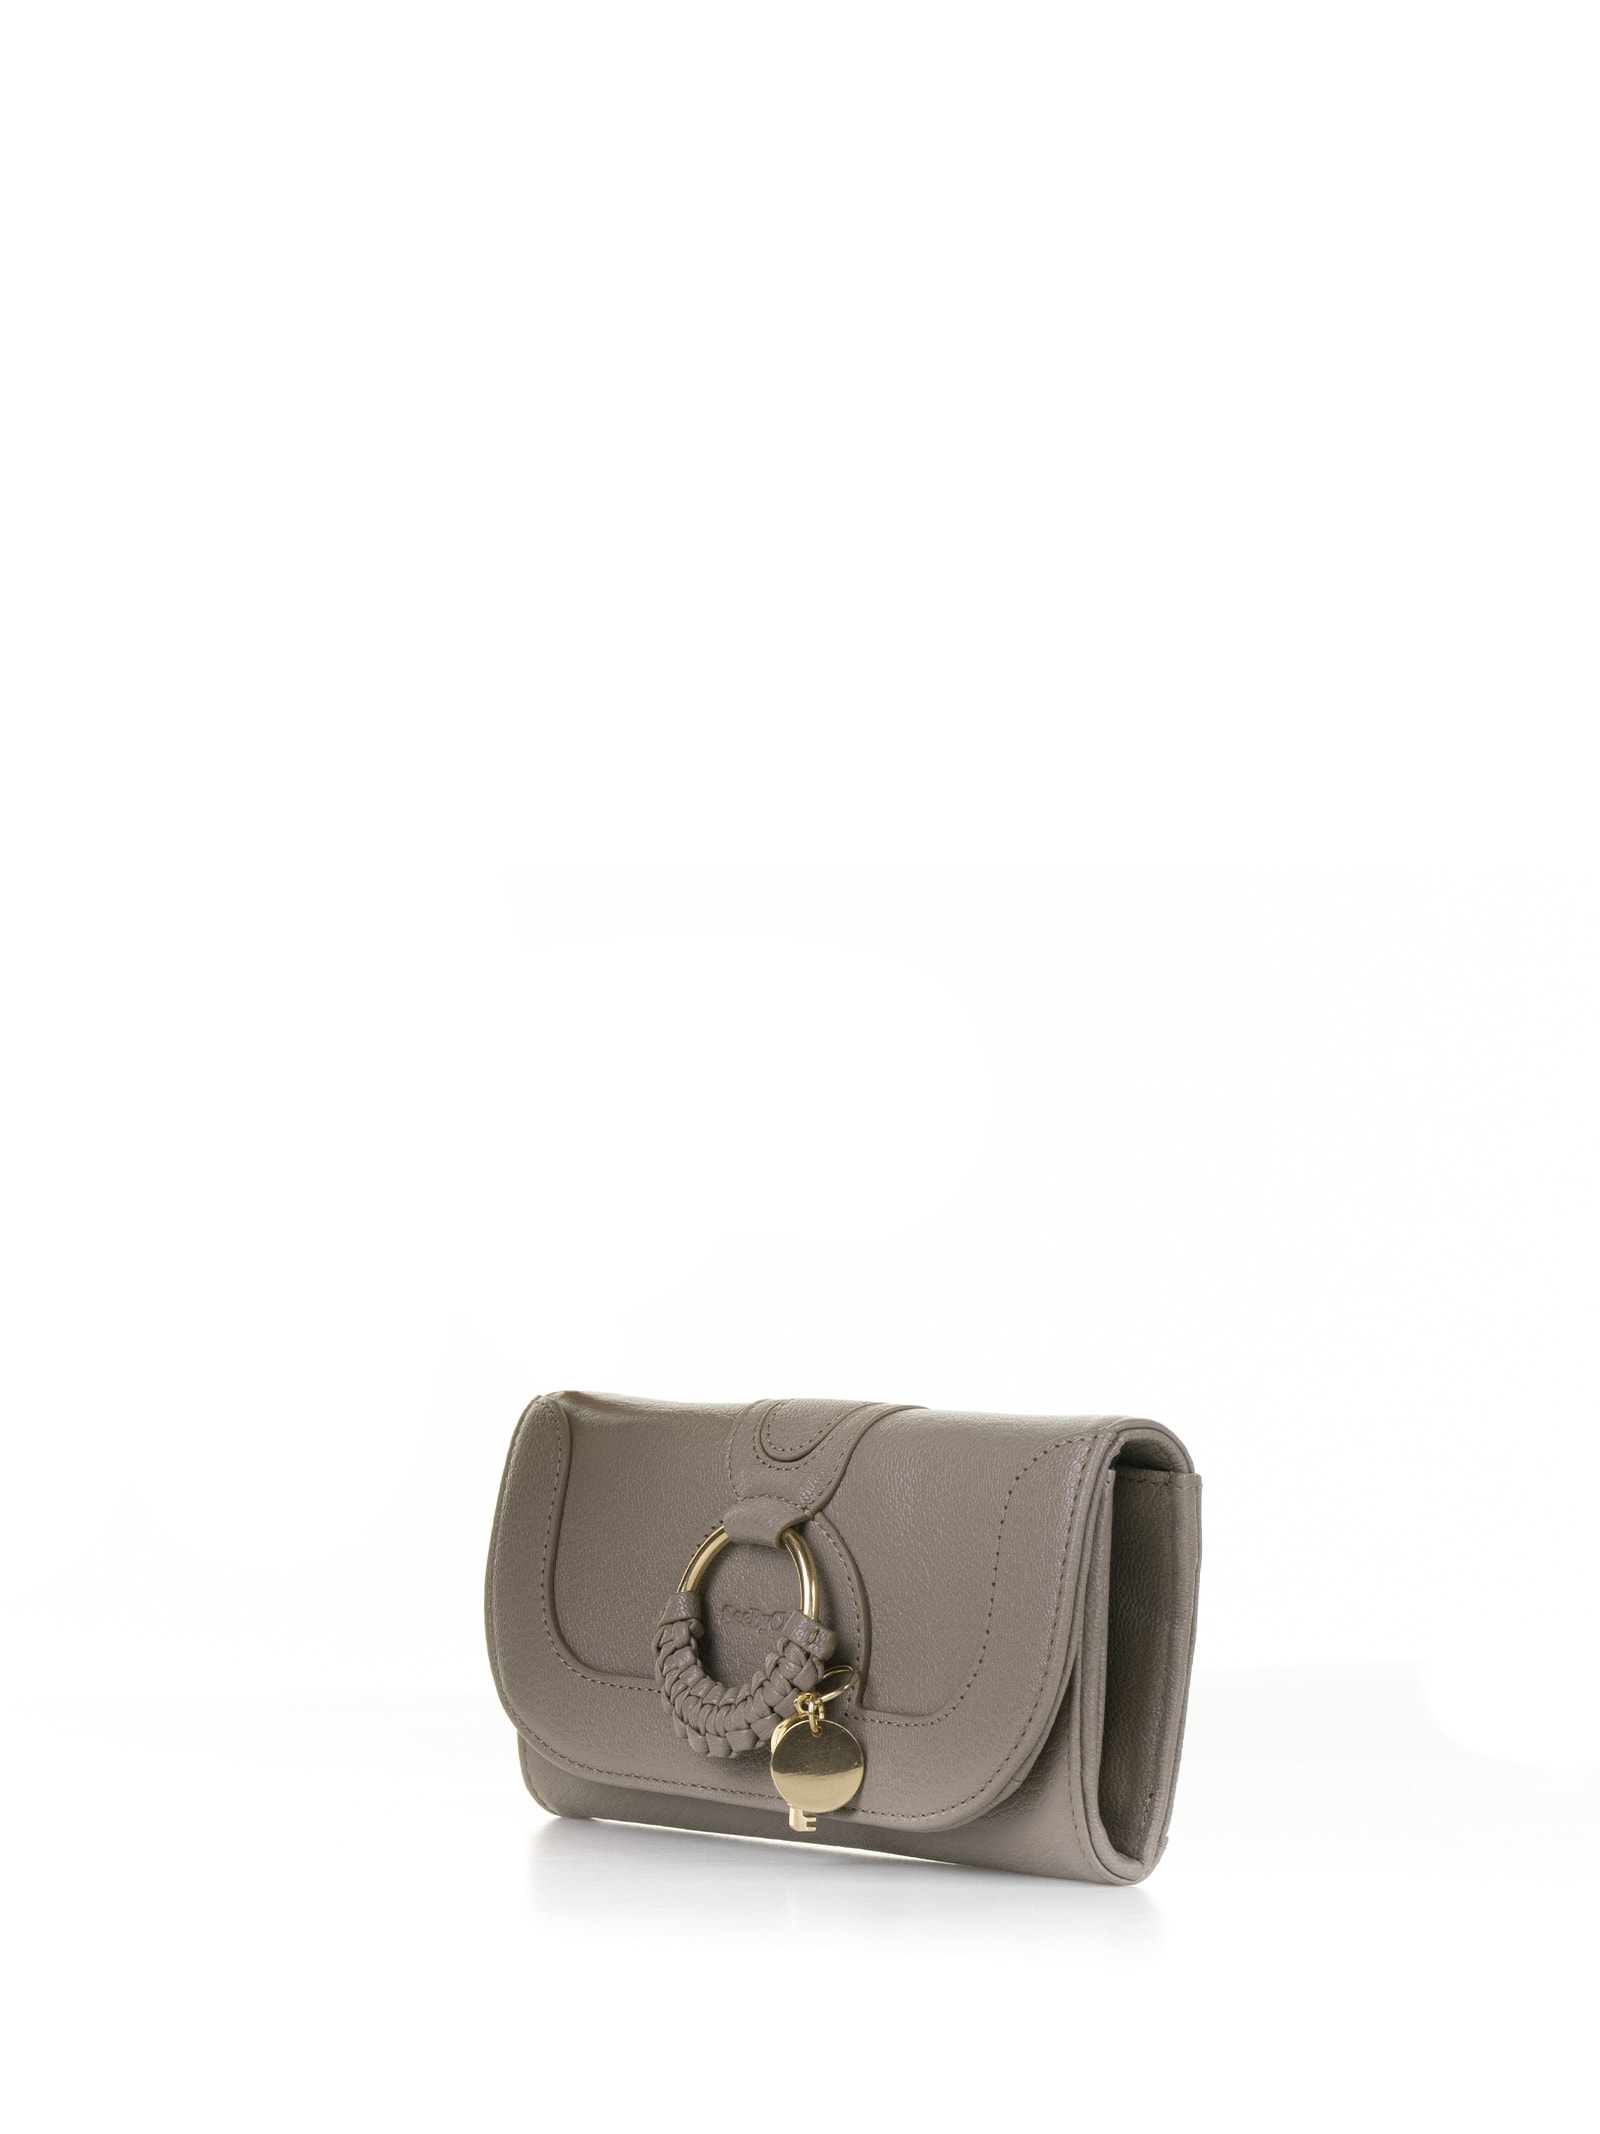 Shop See By Chloé Hana Gray Leather Wallet In Motty Grey